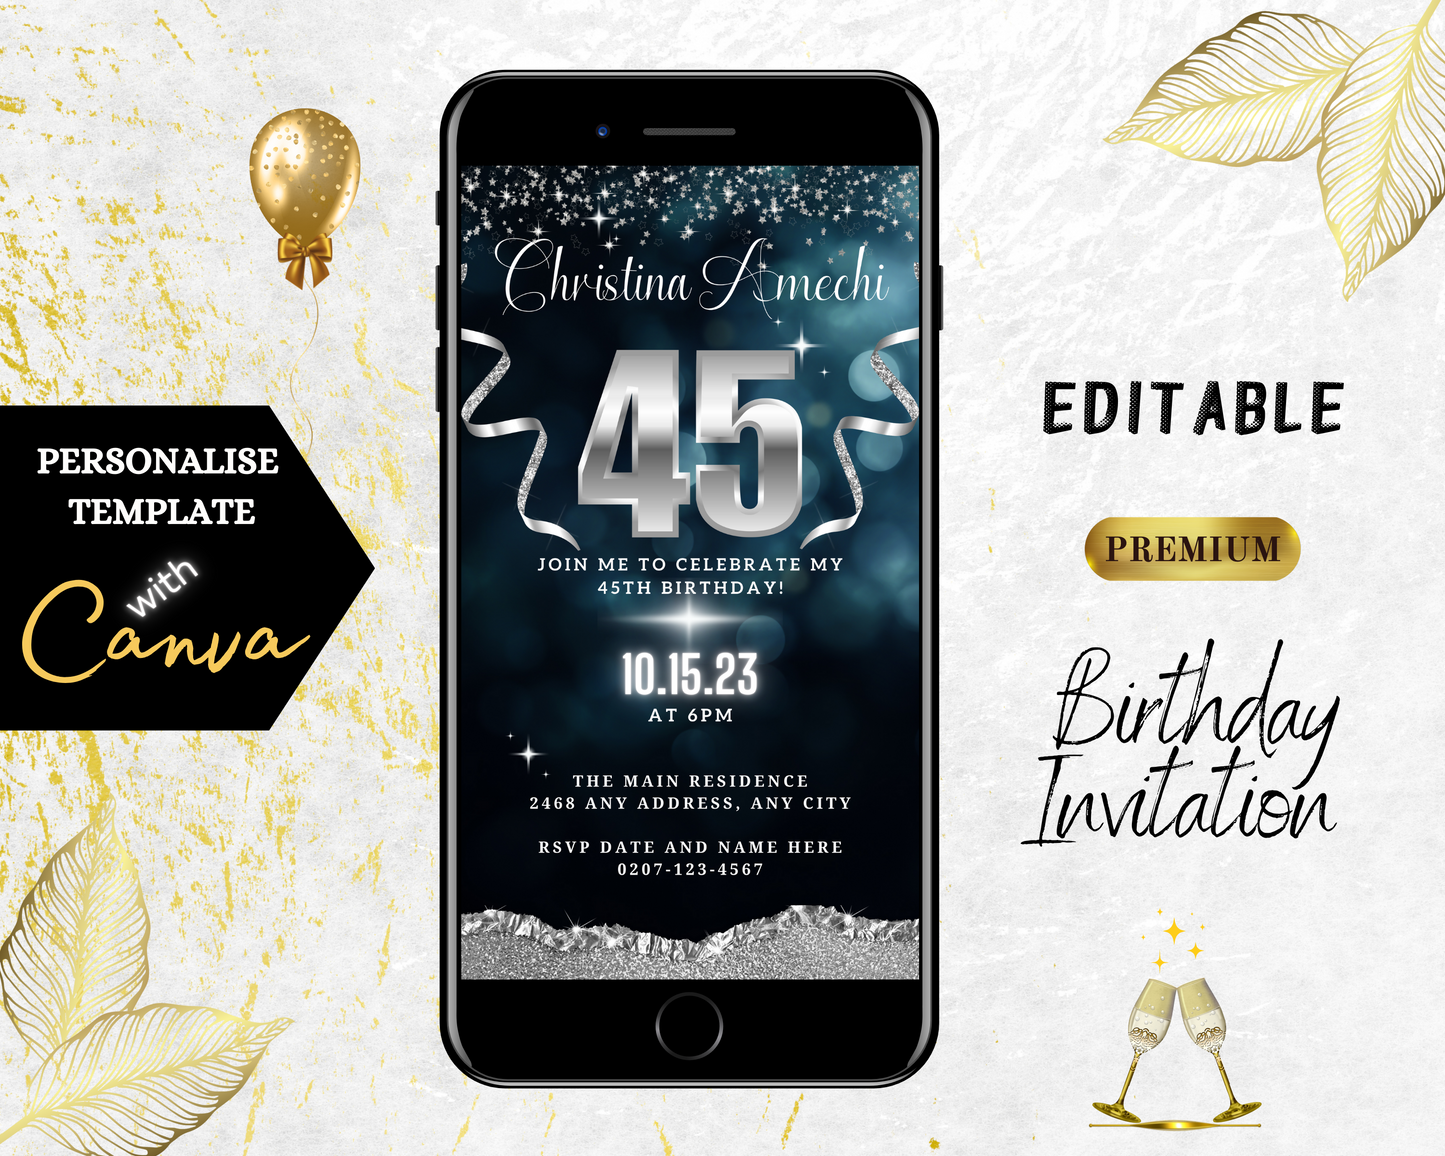 Customisable Navy Blue Silver Glitter 45th Birthday Evite displayed on a smartphone screen, featuring editable text and decorative elements for a digital invitation.